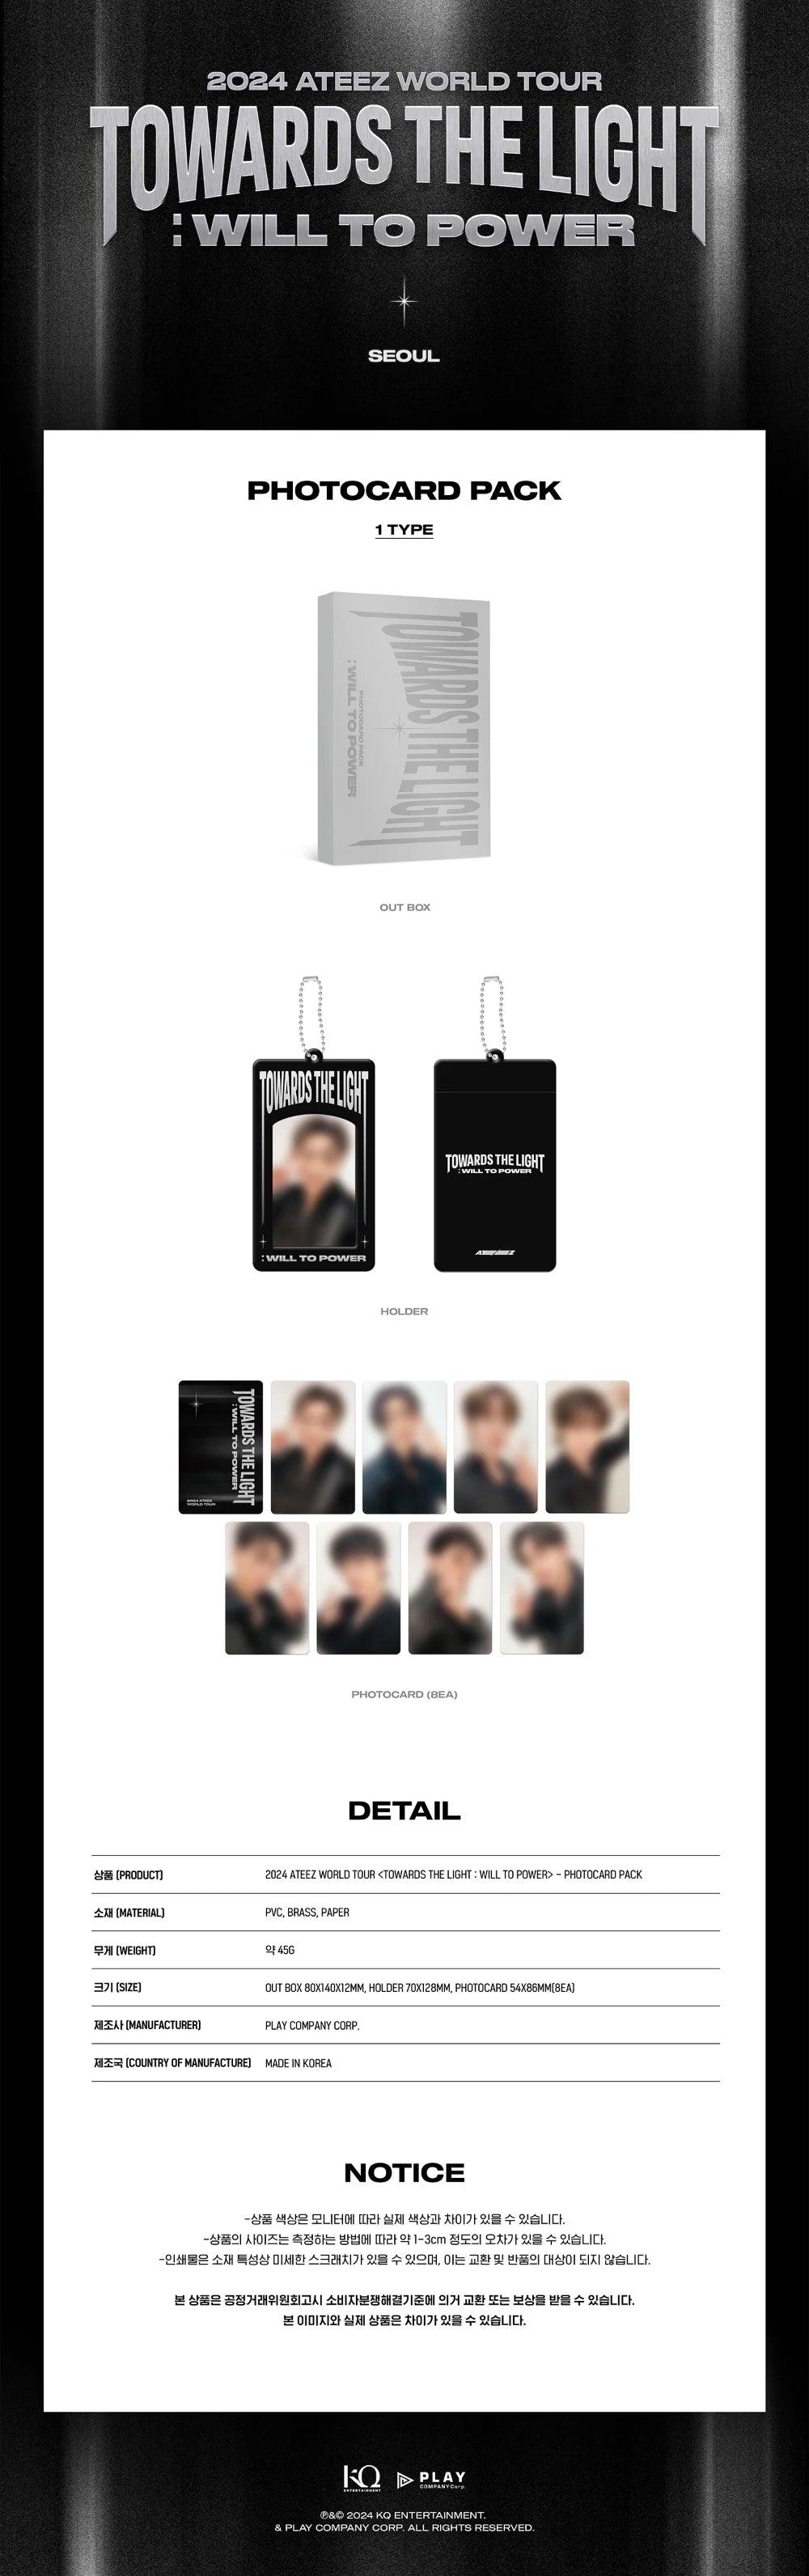 ATEEZ -TOWARDS THE LIGHT WILL TO POWER (Official MD) : PHOTOCARD PACK - KAEPJJANG SHOP (캡짱 숍)